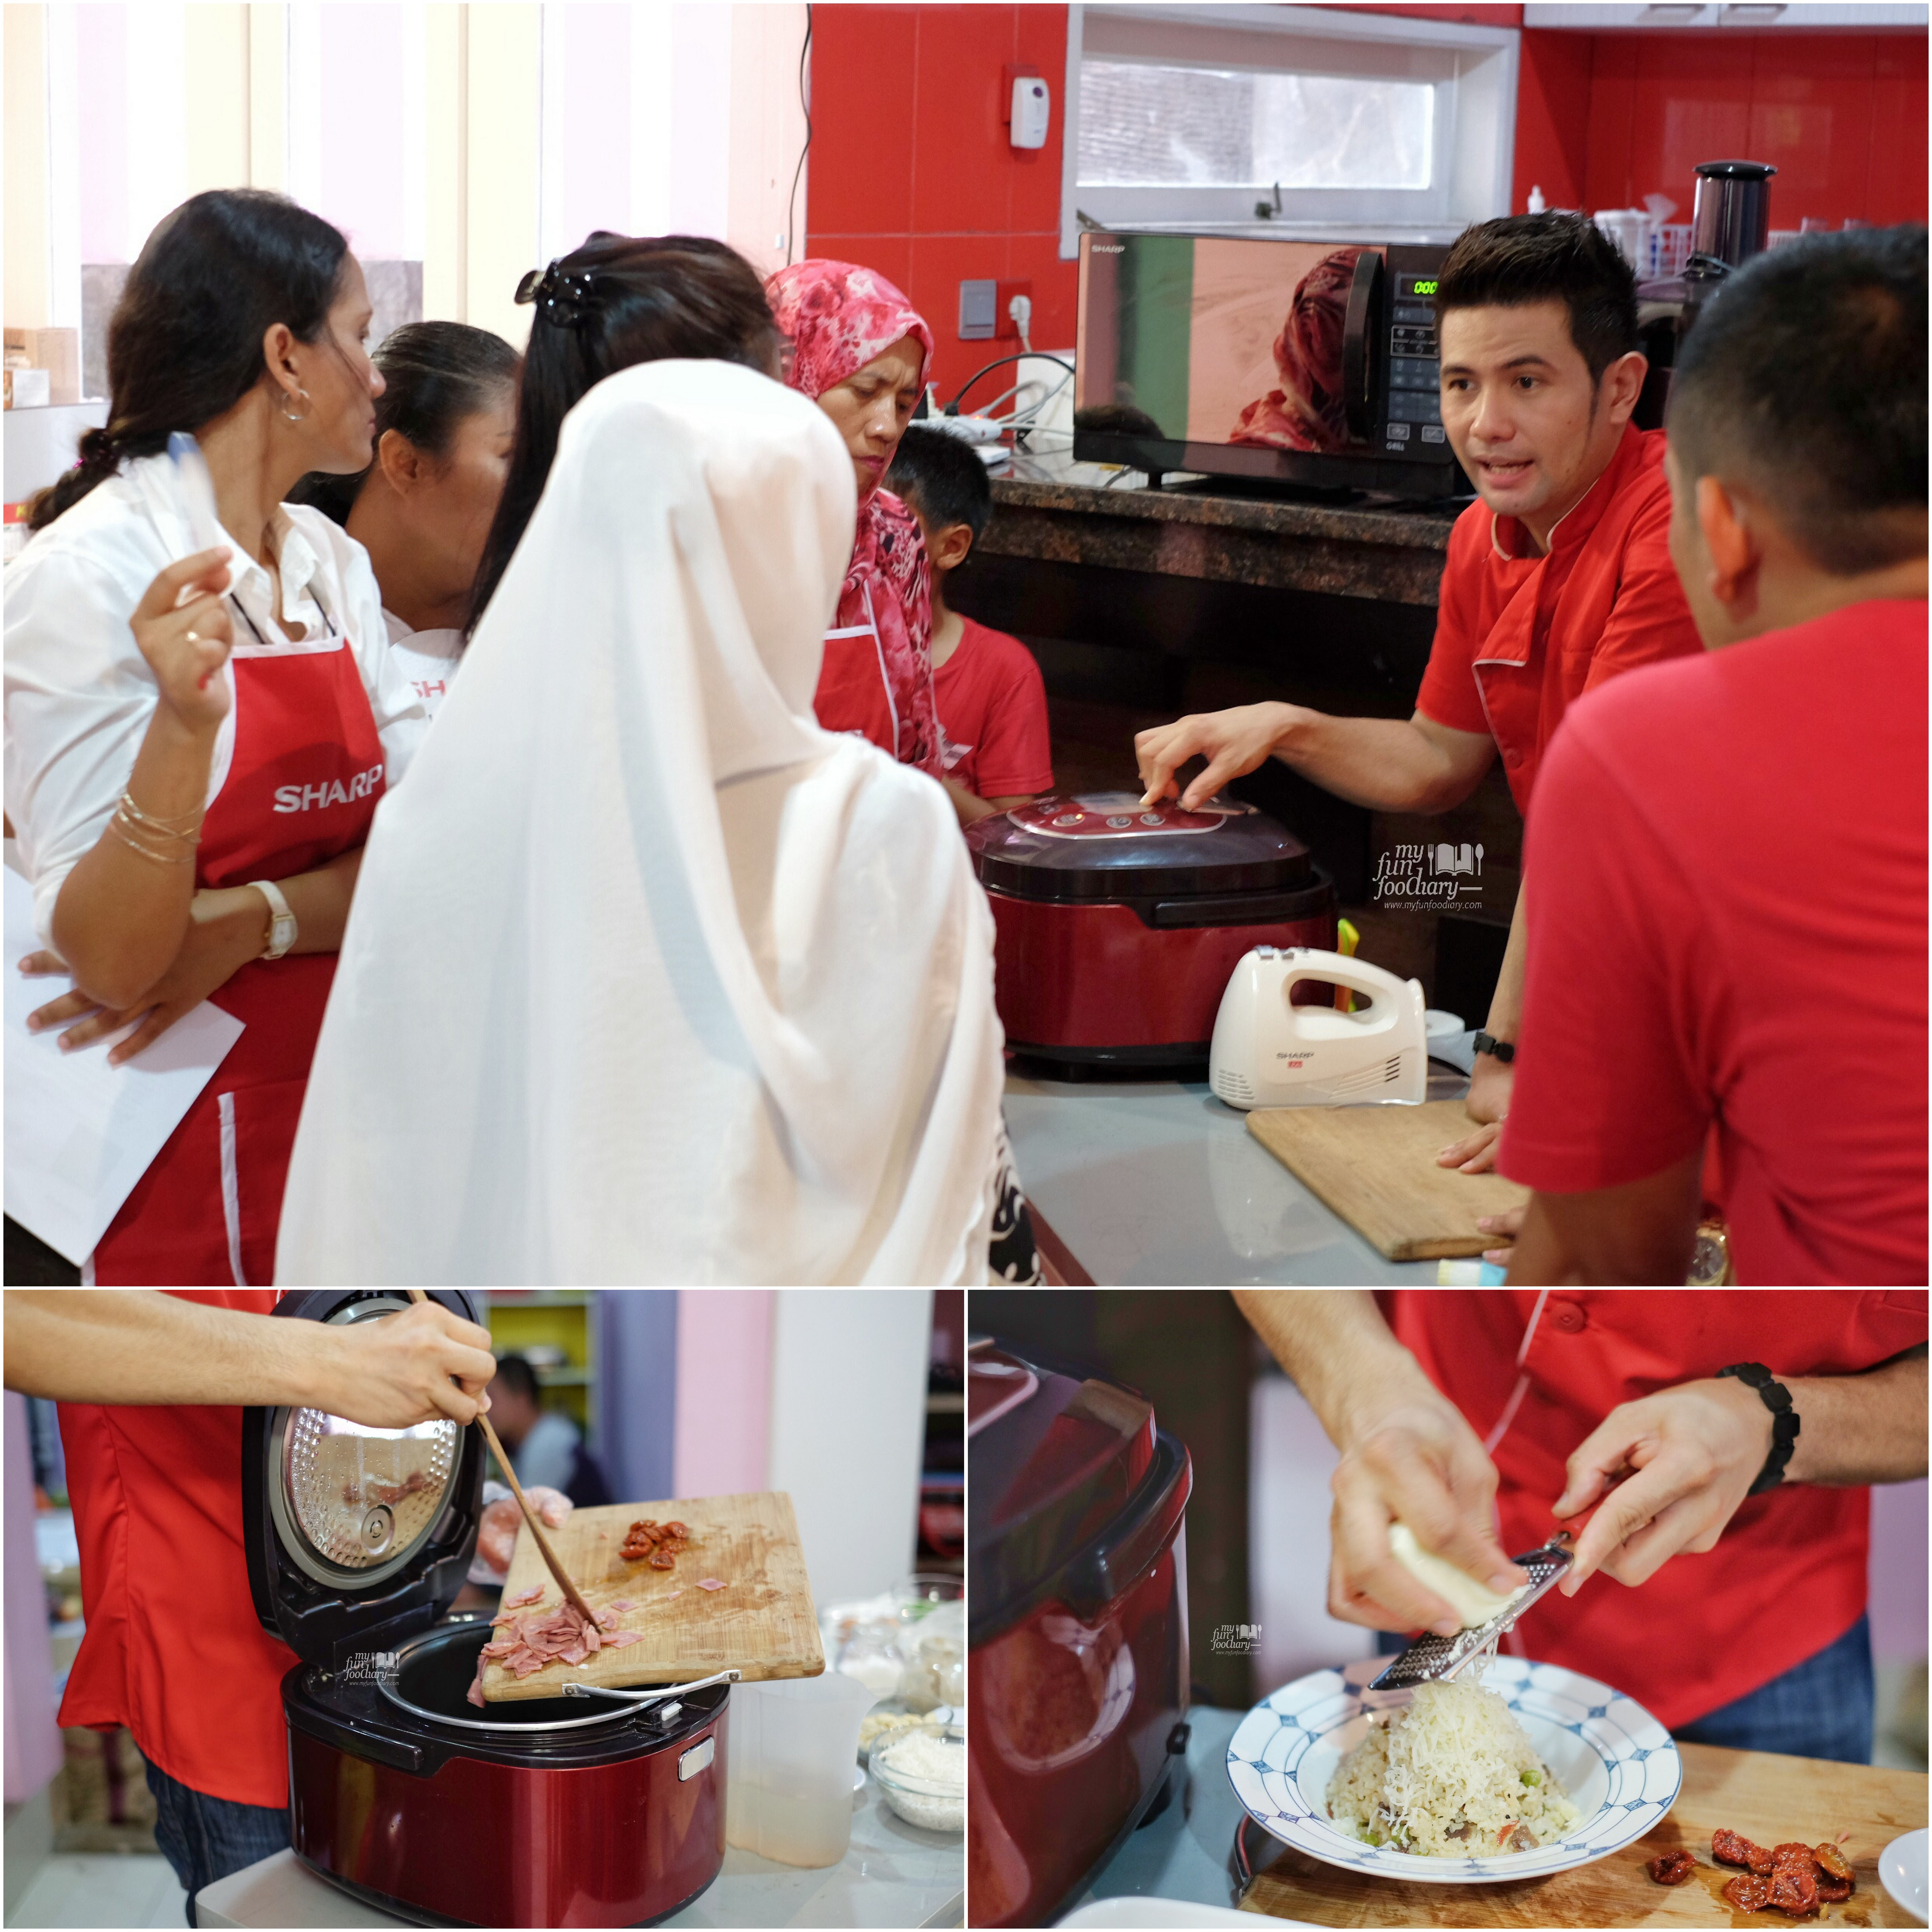 One Rice Cooker for so many dishes by Sharp Indonesia - by Myfunfoodiary